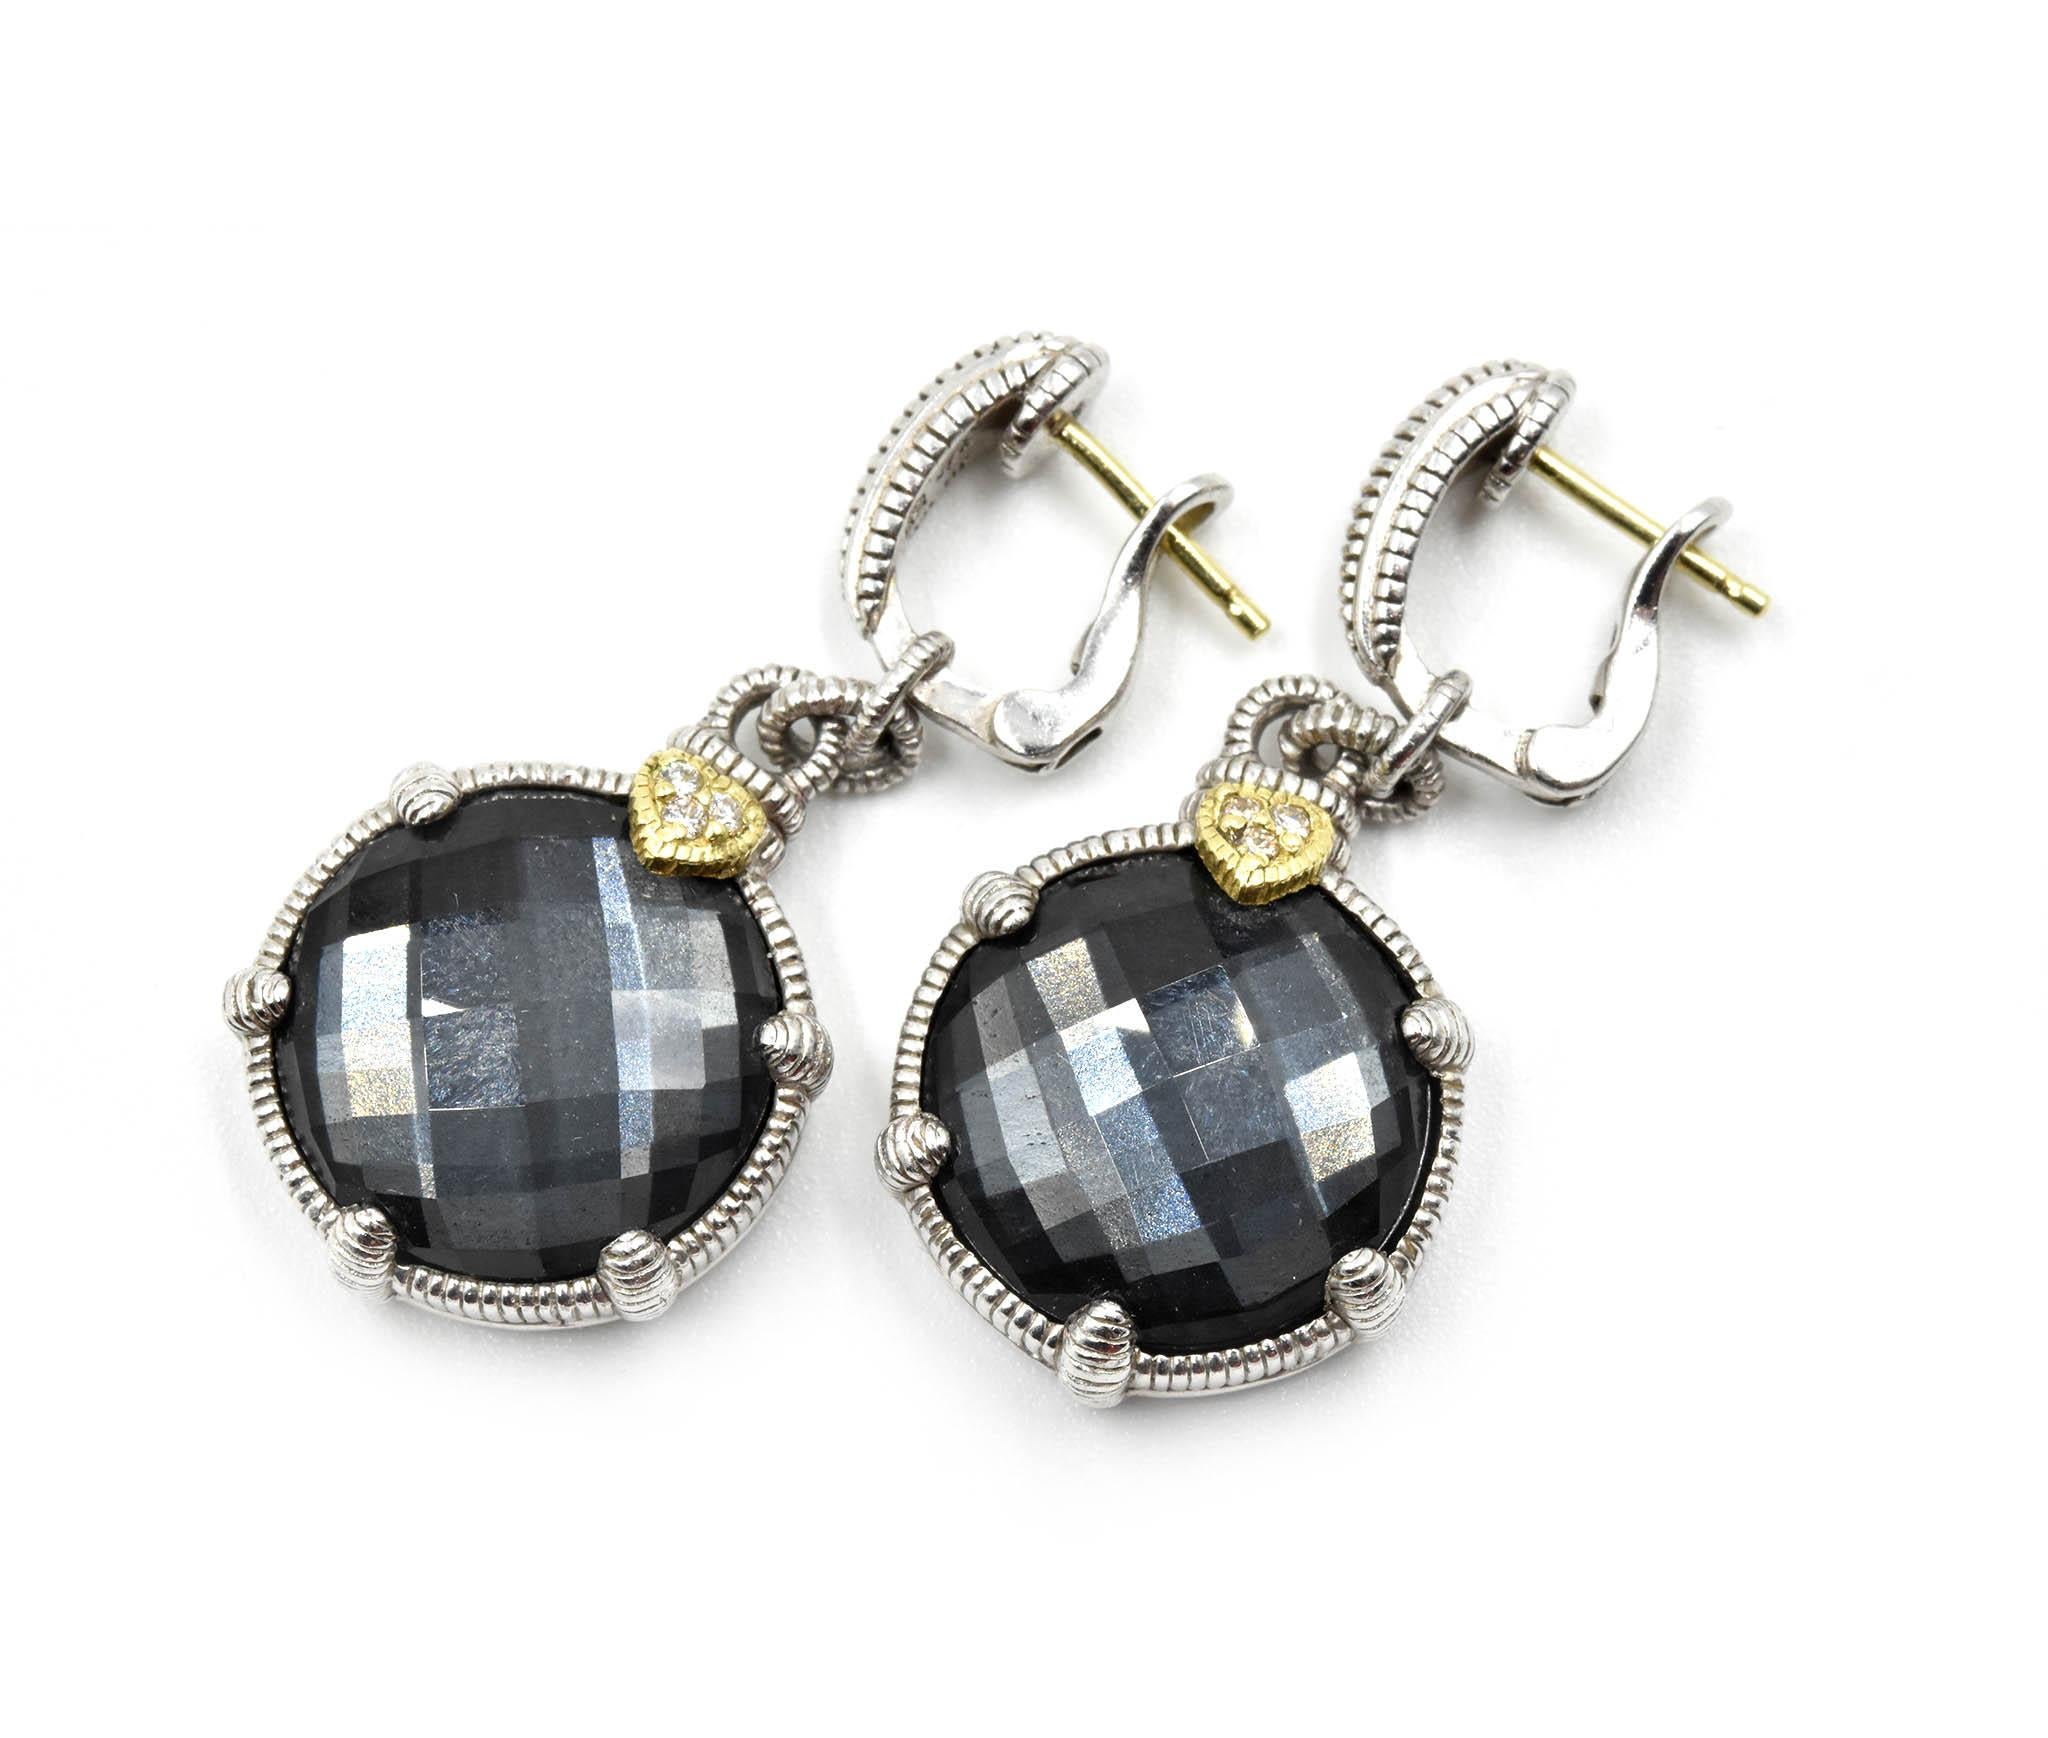 Designer: Judith Ripka
Material: sterling silver
Gemstone: black onyx
Dimensions: each earring measures 1 1/4-inches long and 5/8-inches wide
Weight: 15.56 grams
